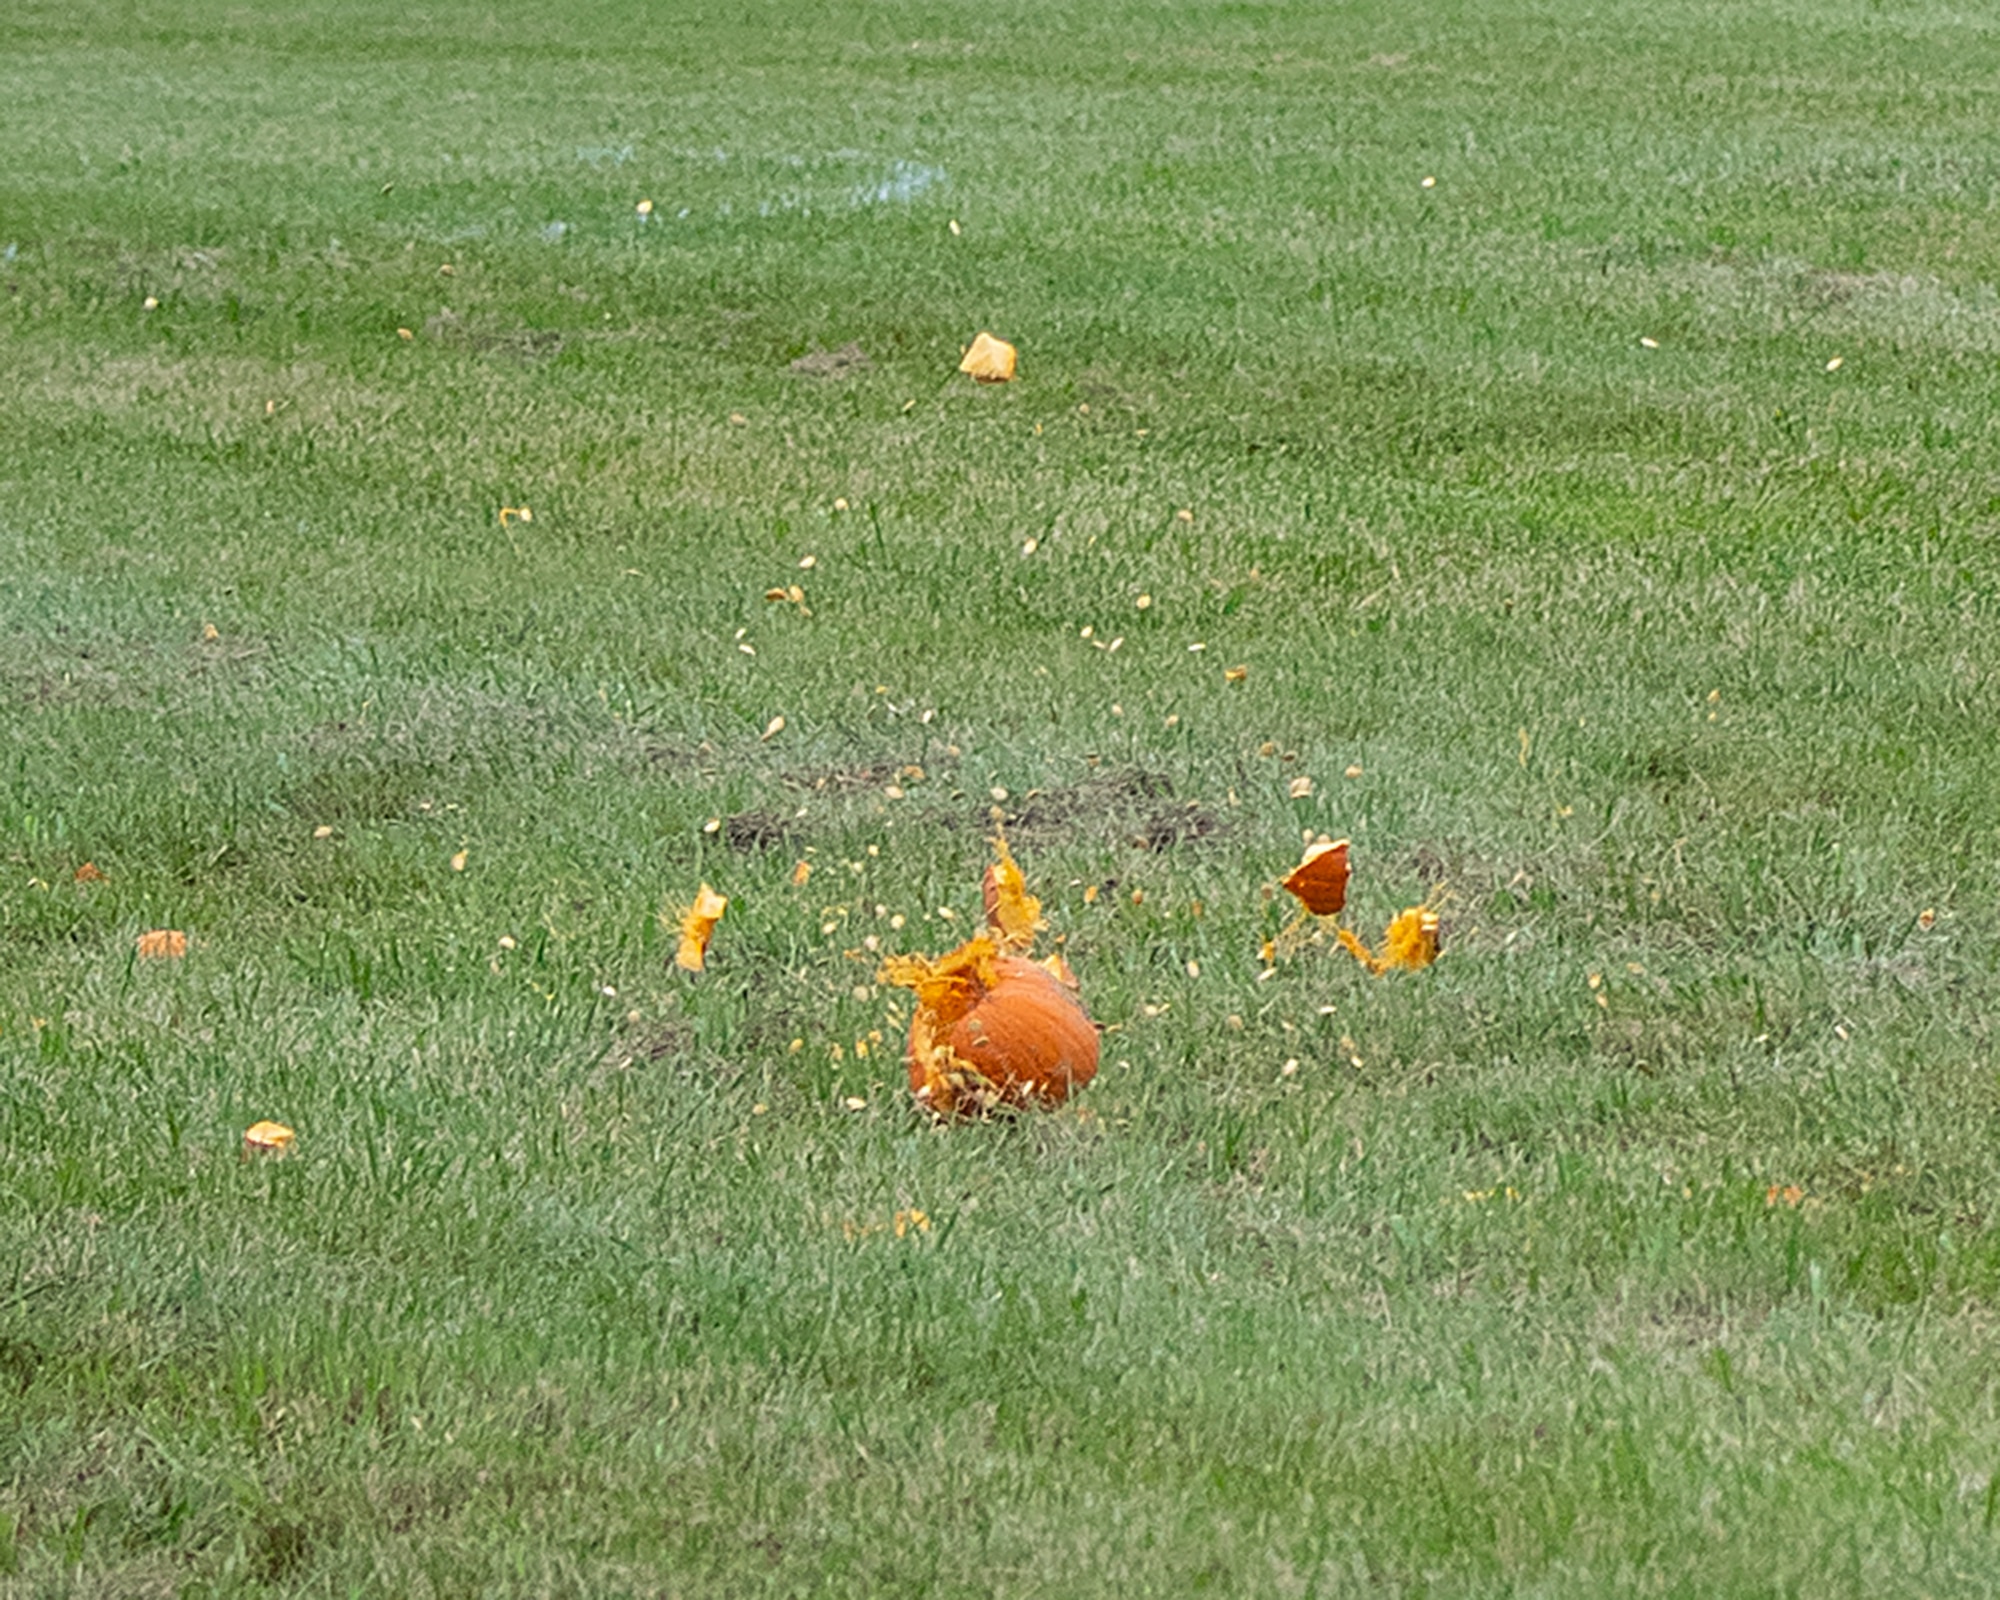 Pumpkin pieces and seeds fly as one lands downrange Oct. 22, 2021, during the 16th Annual Pumpkin Chuck at Wright-Patterson Air Force Base, Ohio. (U.S. Air Force photo by R.J. Oriez)